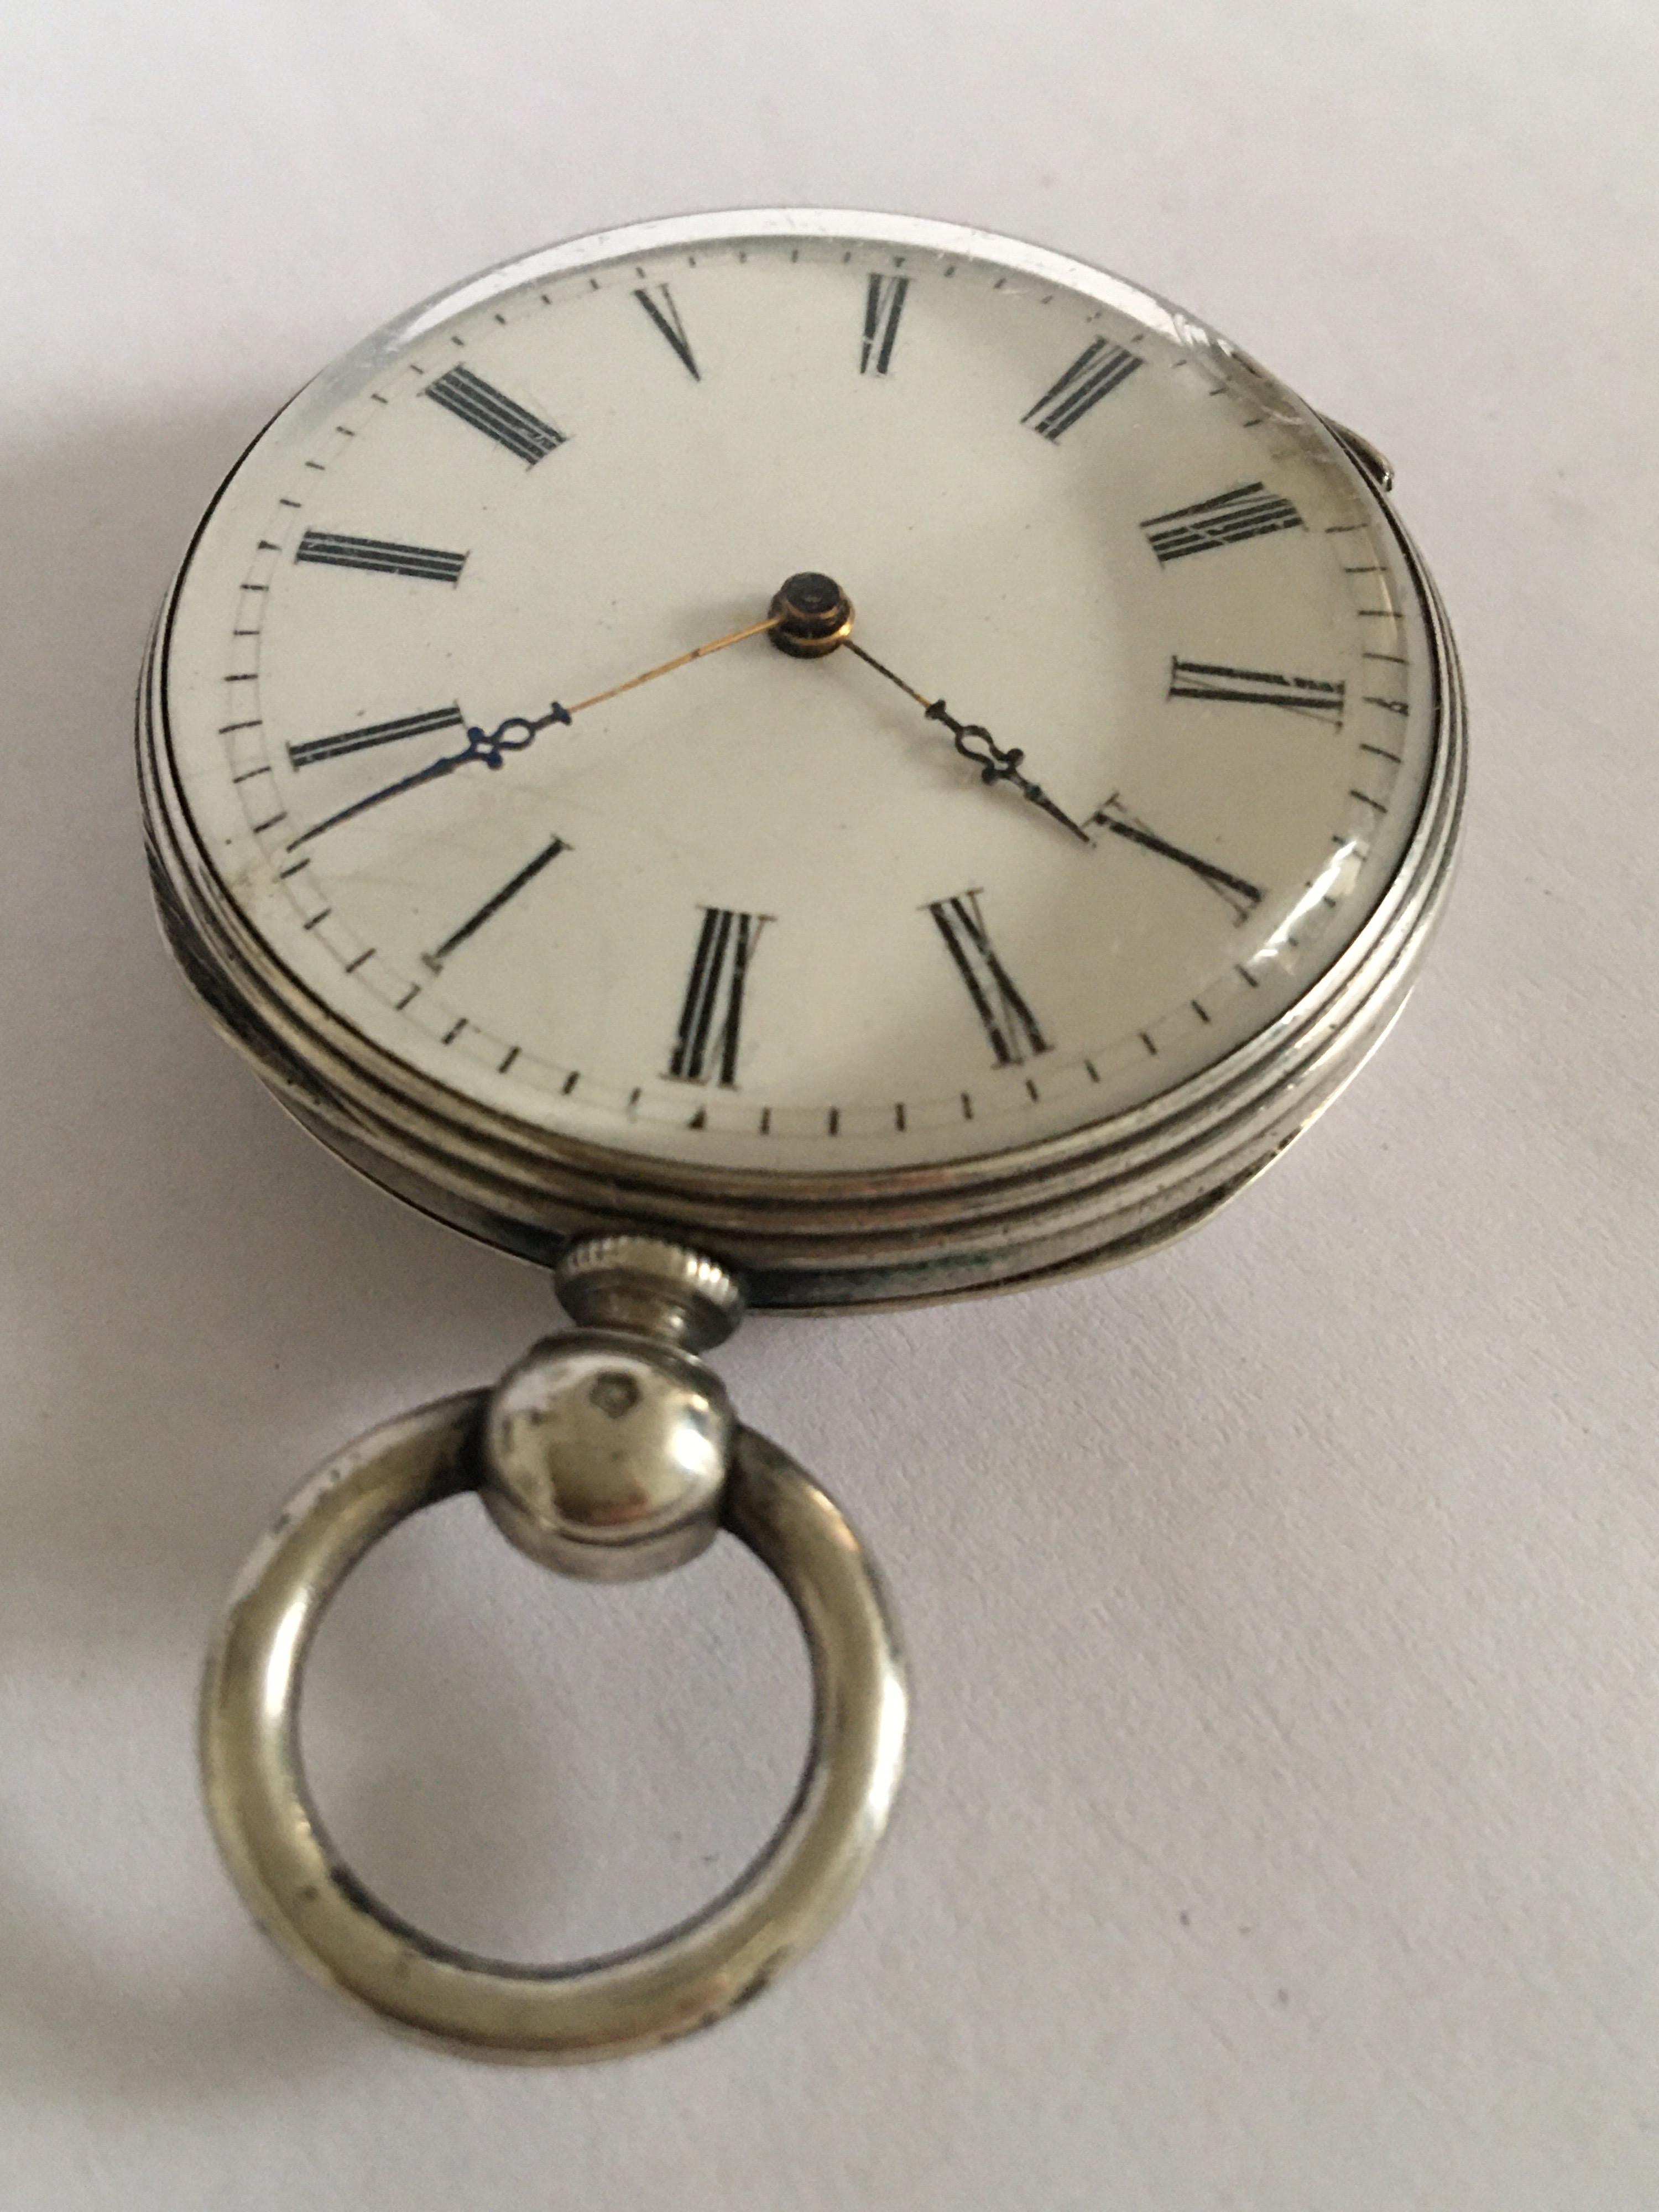 This beautiful watch is working and is ticking well.
Visible chipped on the enamel dial near 8’o’clock. 

Please study the images carefully as form part of the description.